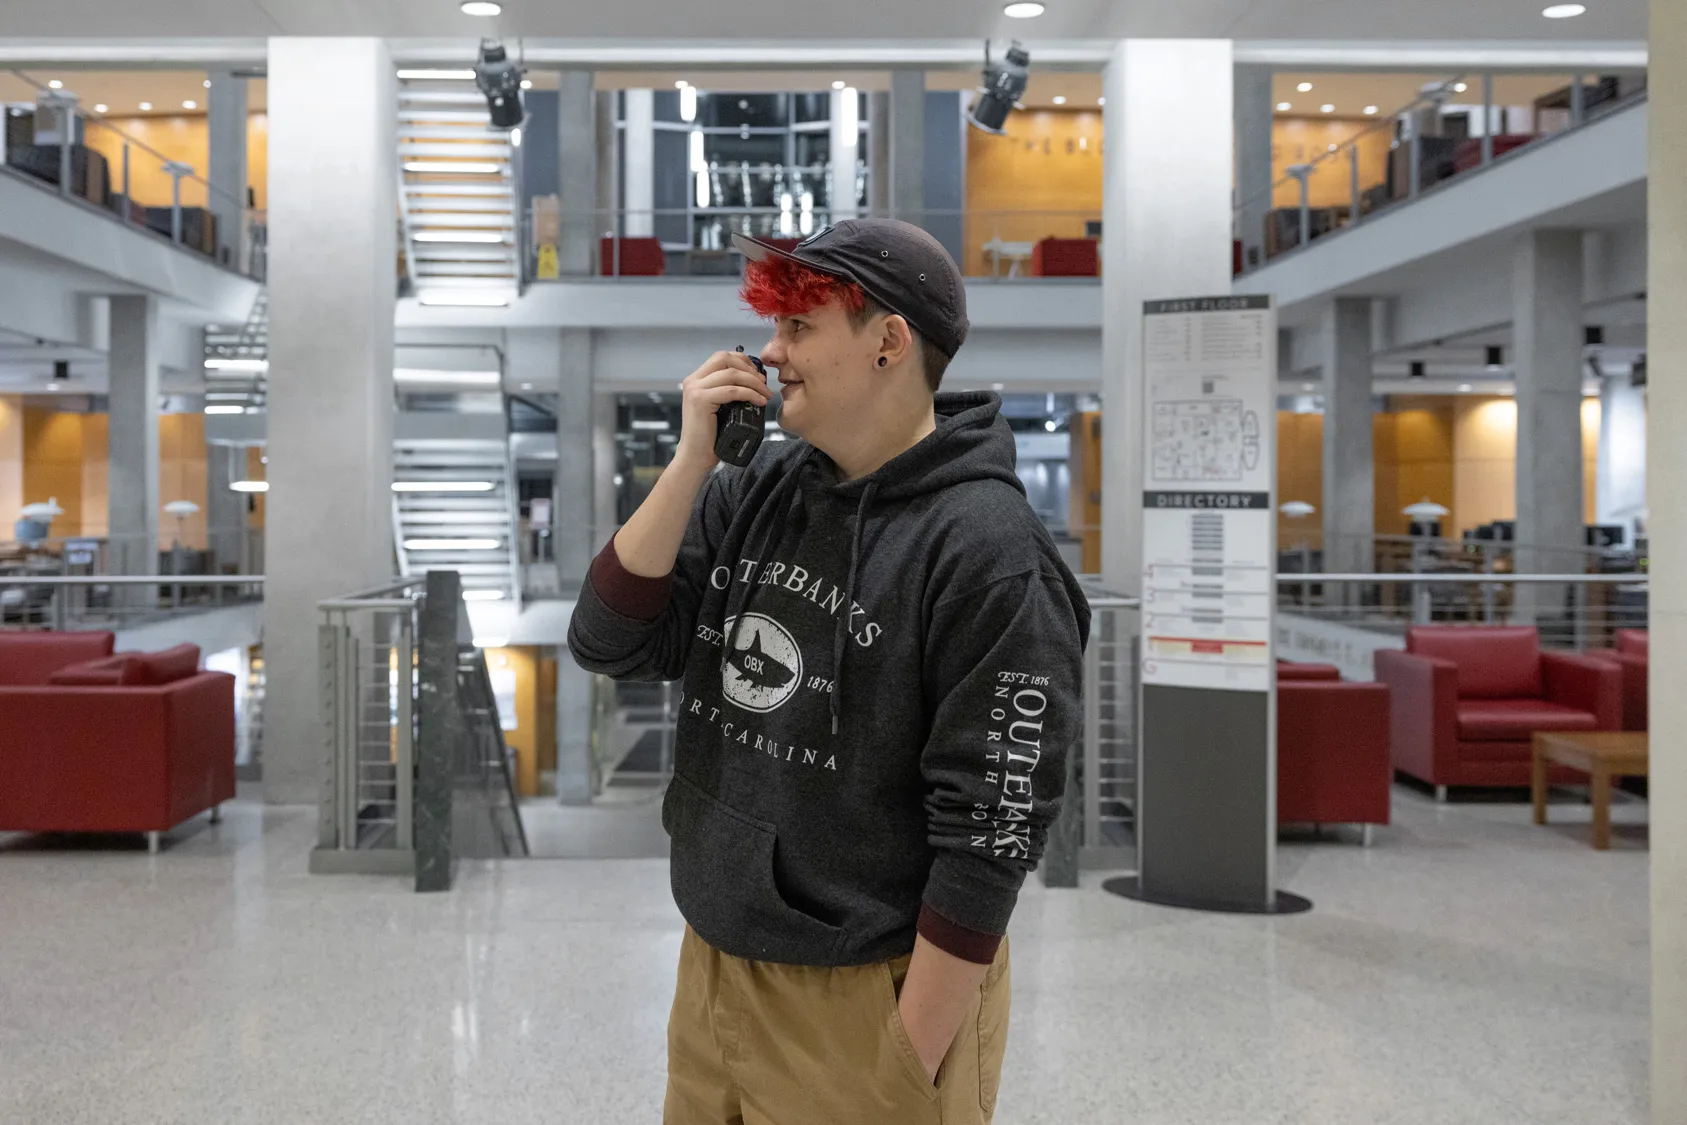 A white student in a sweatshirt, khakis and ballcap over red-orange-dyed hair speaks into a walkie-talkie while on a lower floor of the library. The lights are all on, but no one else can be seen. 